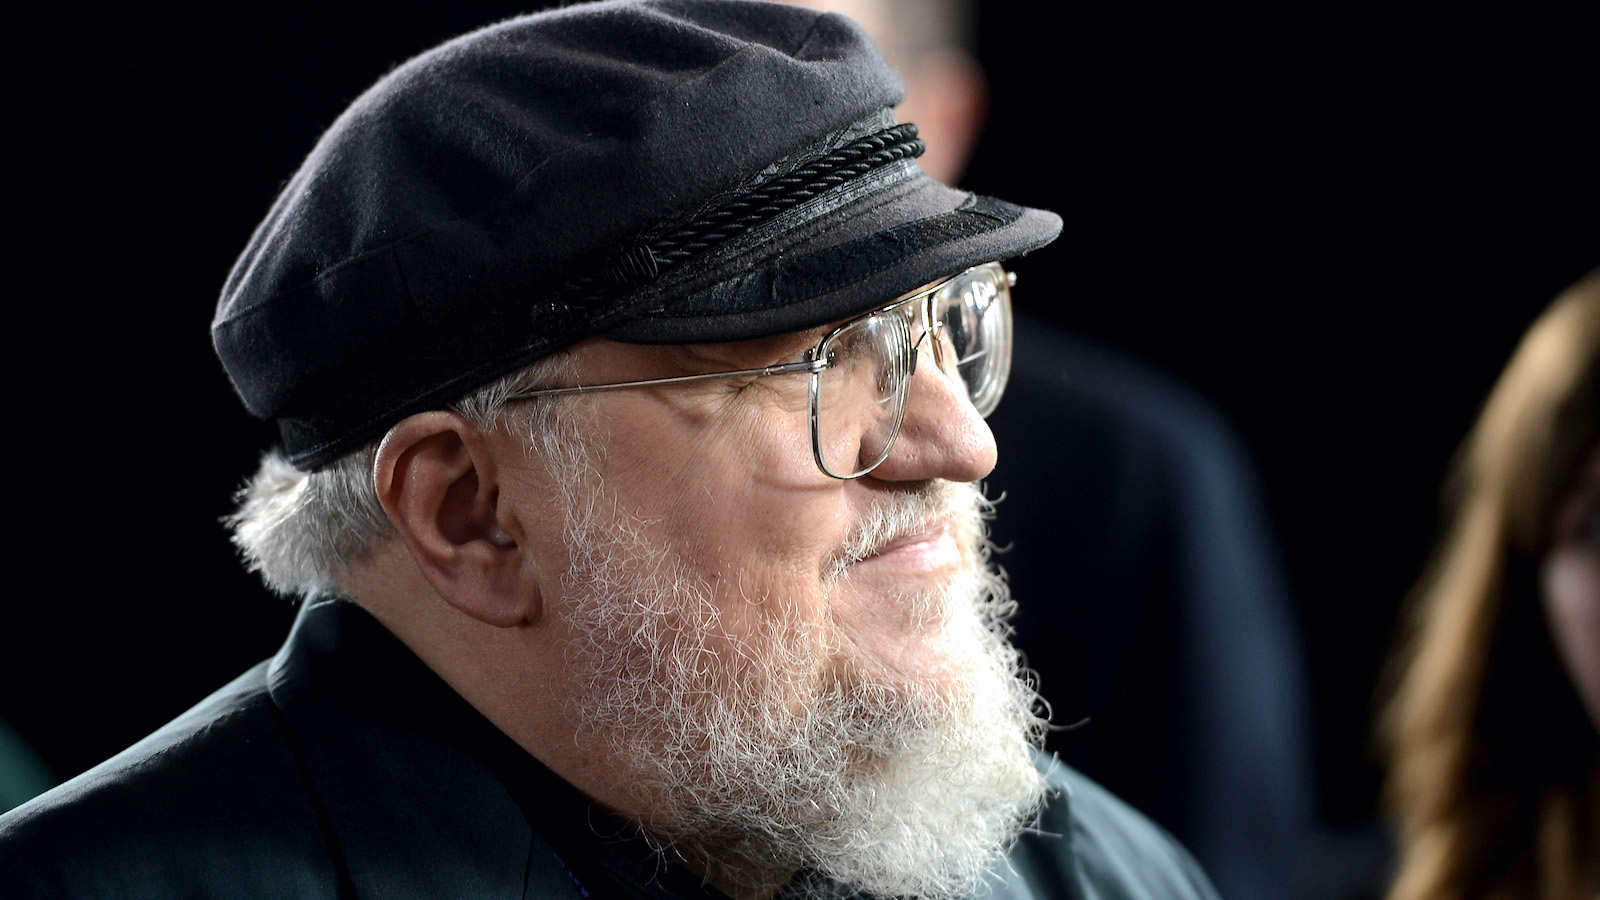 Side profile of George R.R. Martin at the Premiere Of HBO's "Game Of Thrones" Season 3 Red Carpet